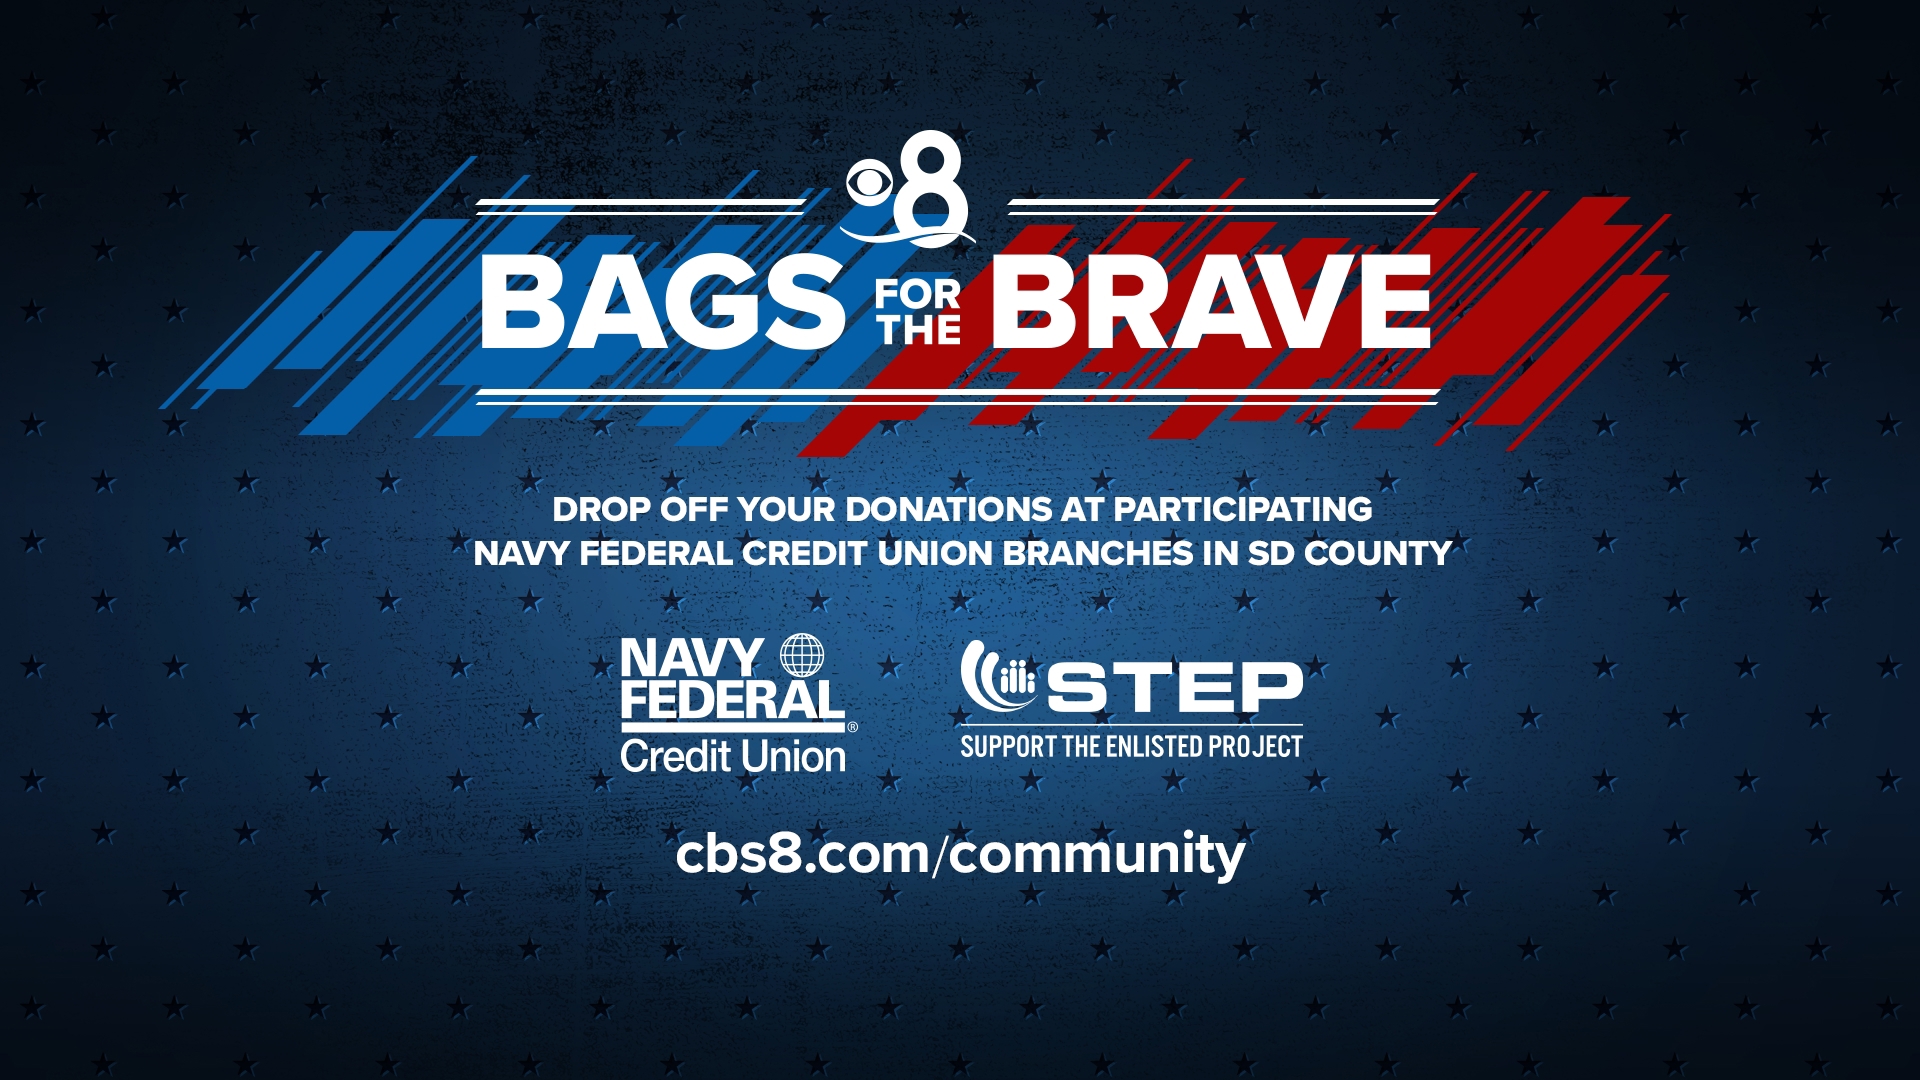 CBS 8 is partnering with Navy Federal Credit Union and Support The Enlisted Project to collect and distribute personal care items for our military families.